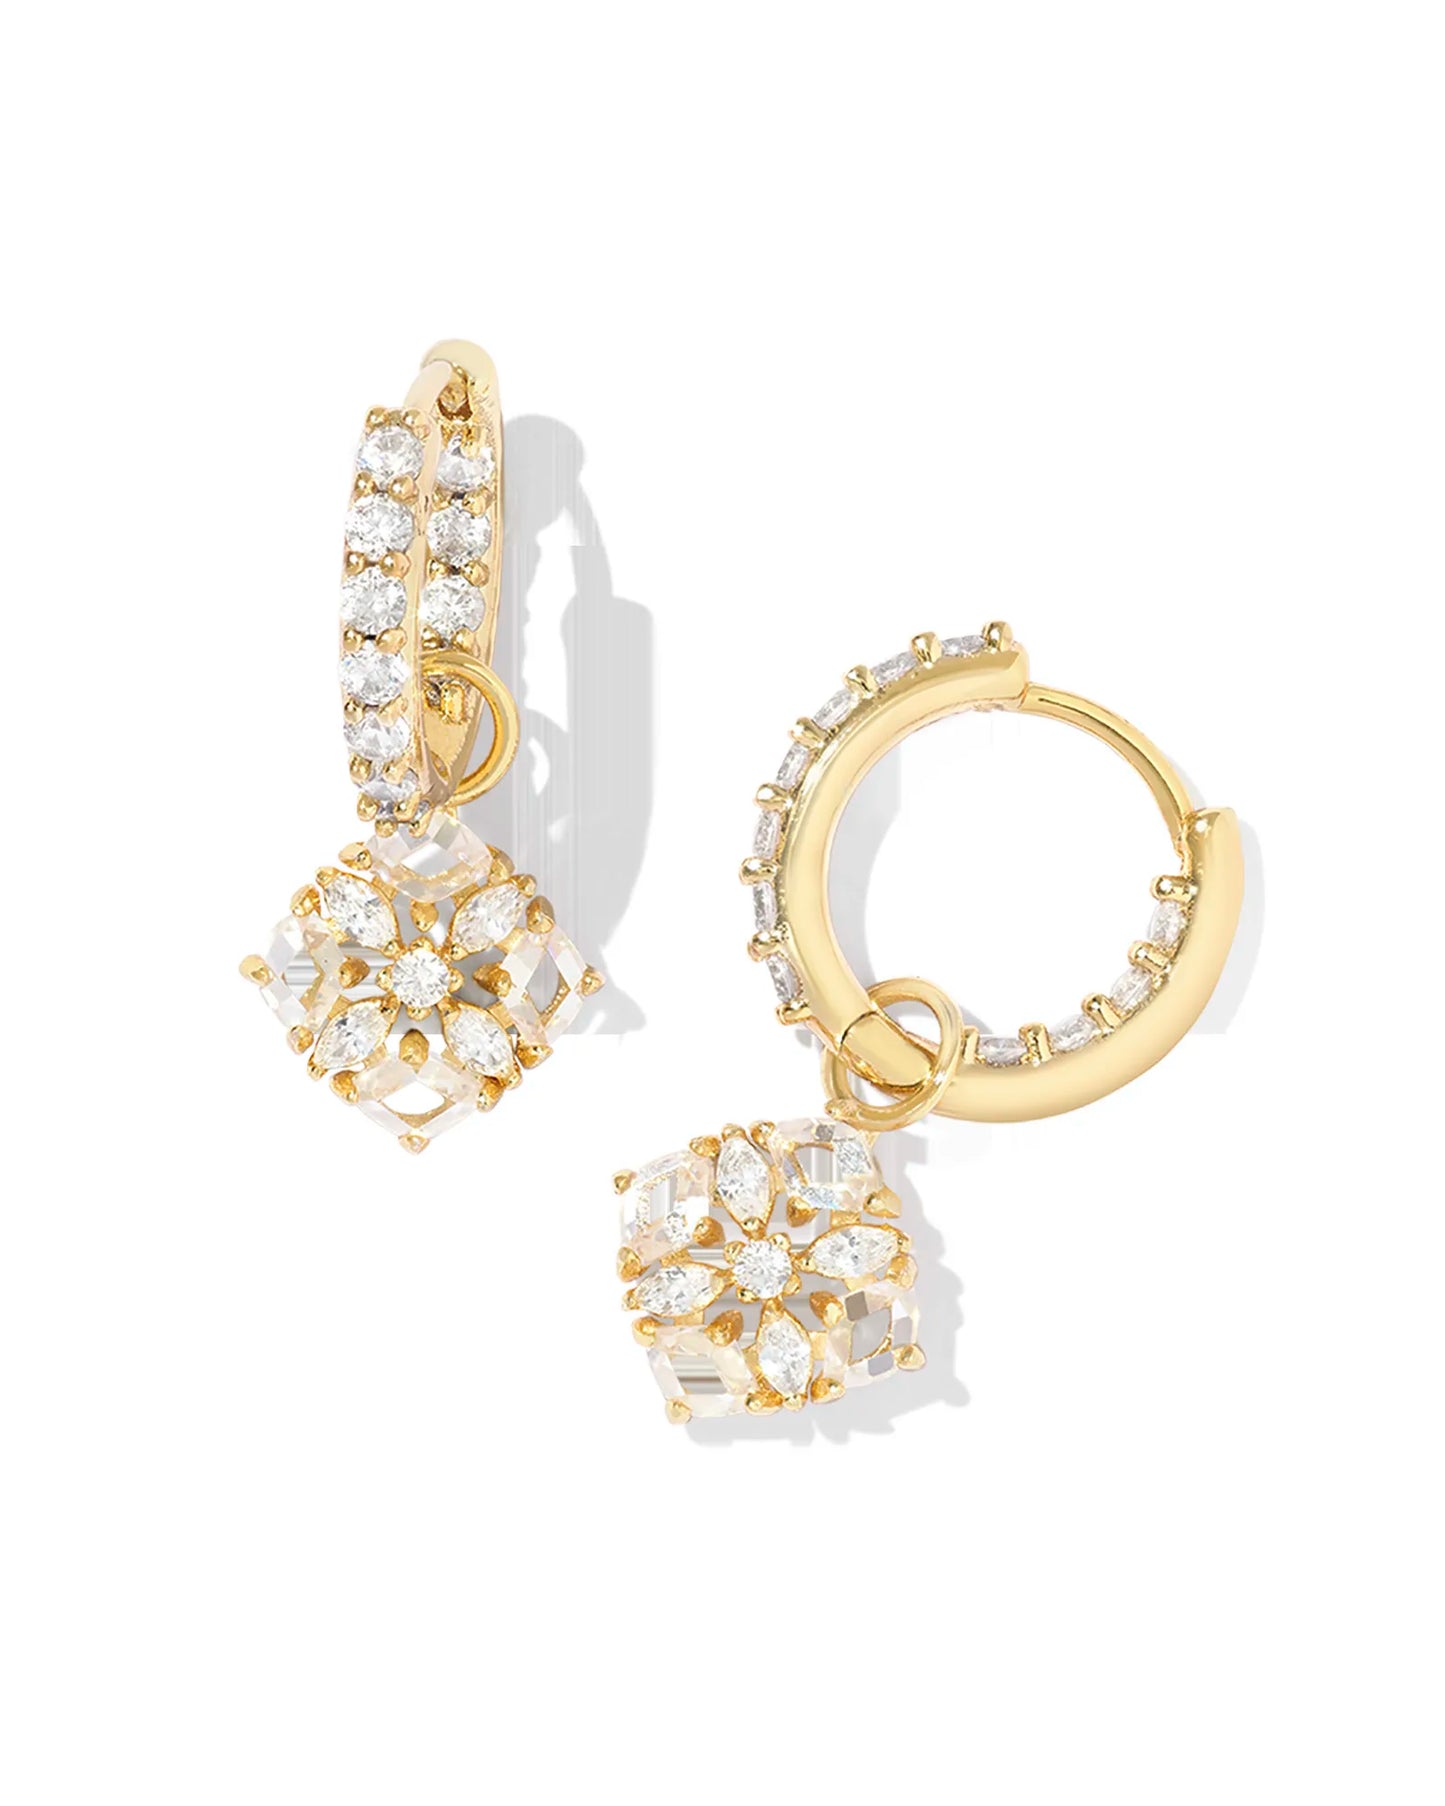 gold huggie earrings with studded white crystals and a studded white crystal flower charm